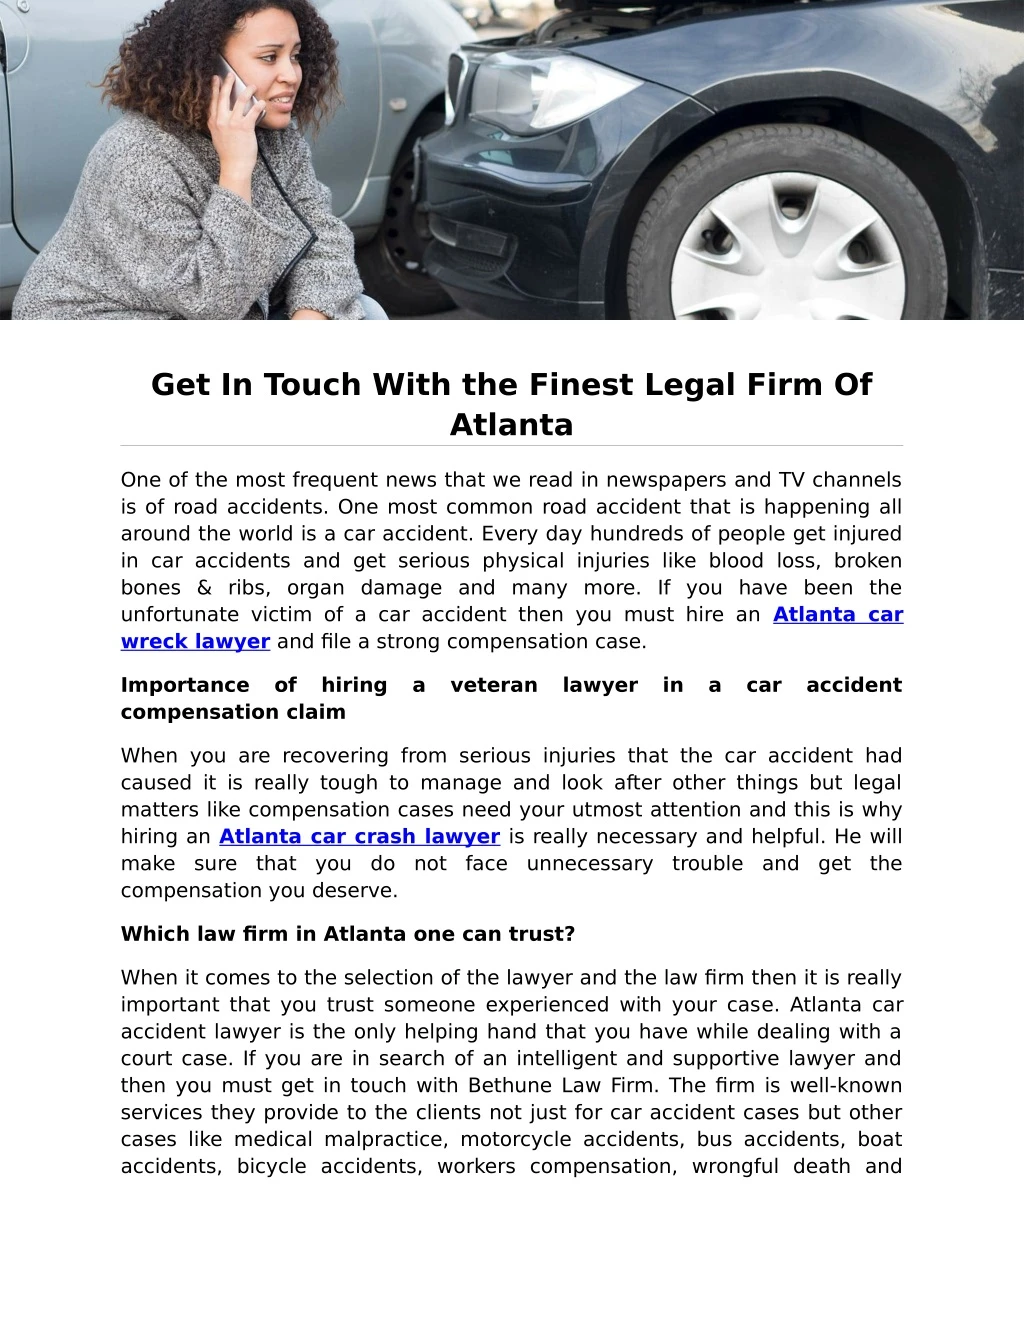 get in touch with the finest legal firm of atlanta